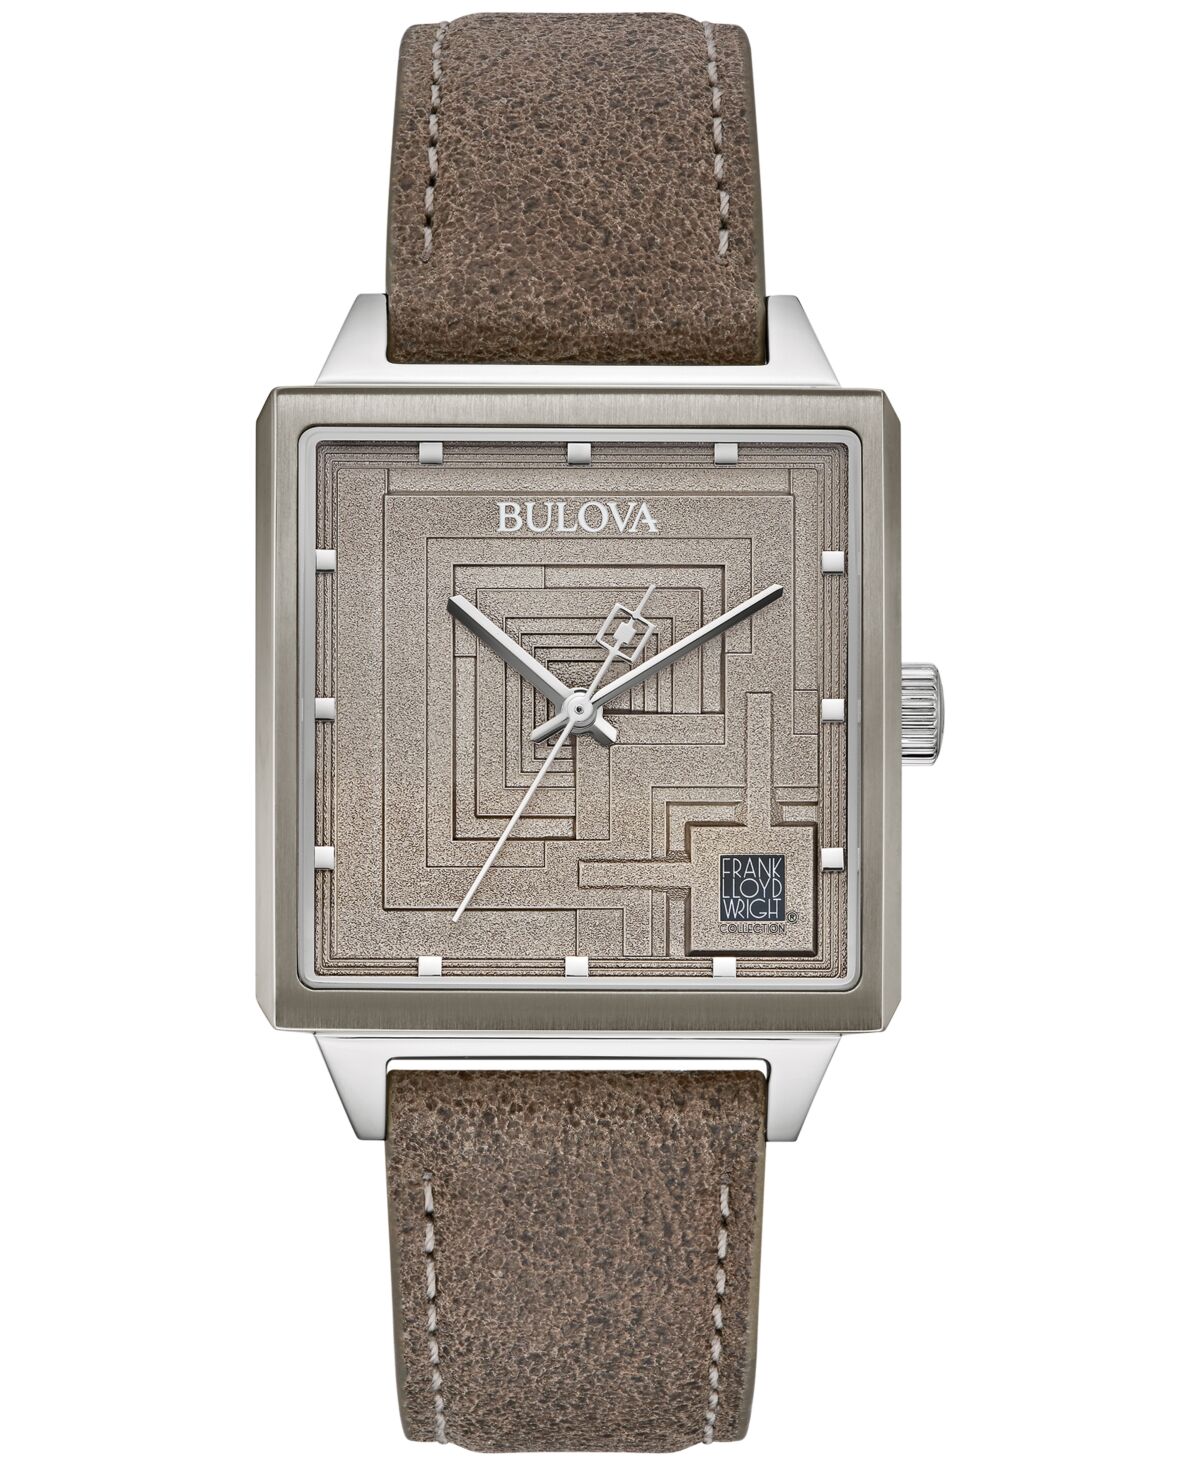 Bulova Men's Ennis House Frank Lloyd Wright Taupe Leather Strap Watch 34mm - Taupe